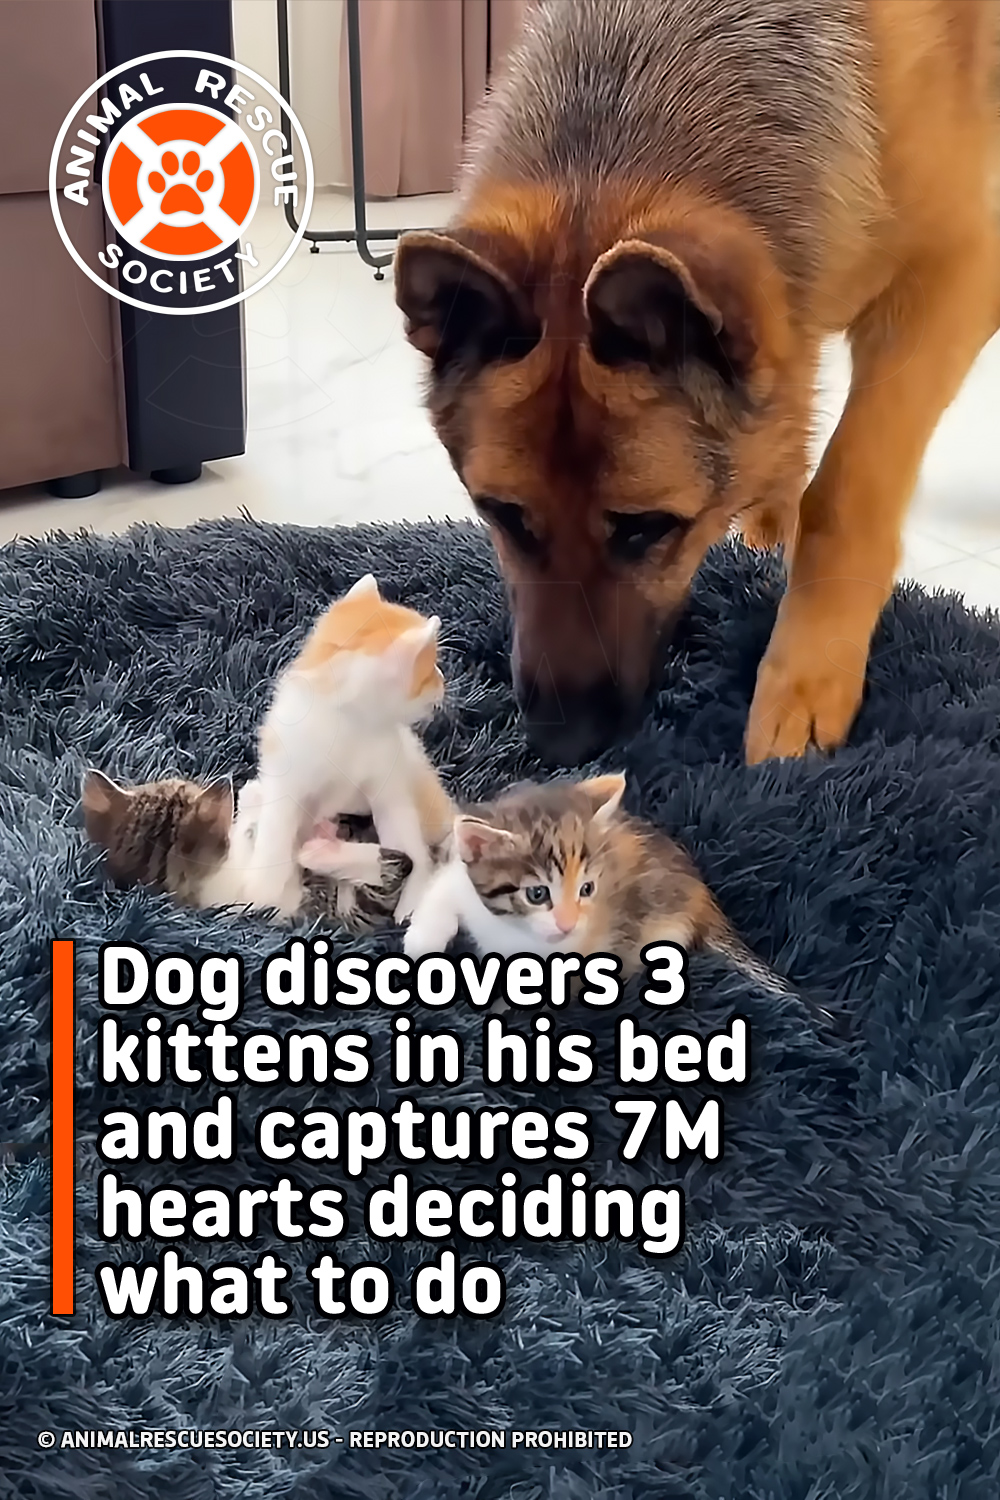 Dog discovers 3 kittens in his bed and captures 7M hearts deciding what to do